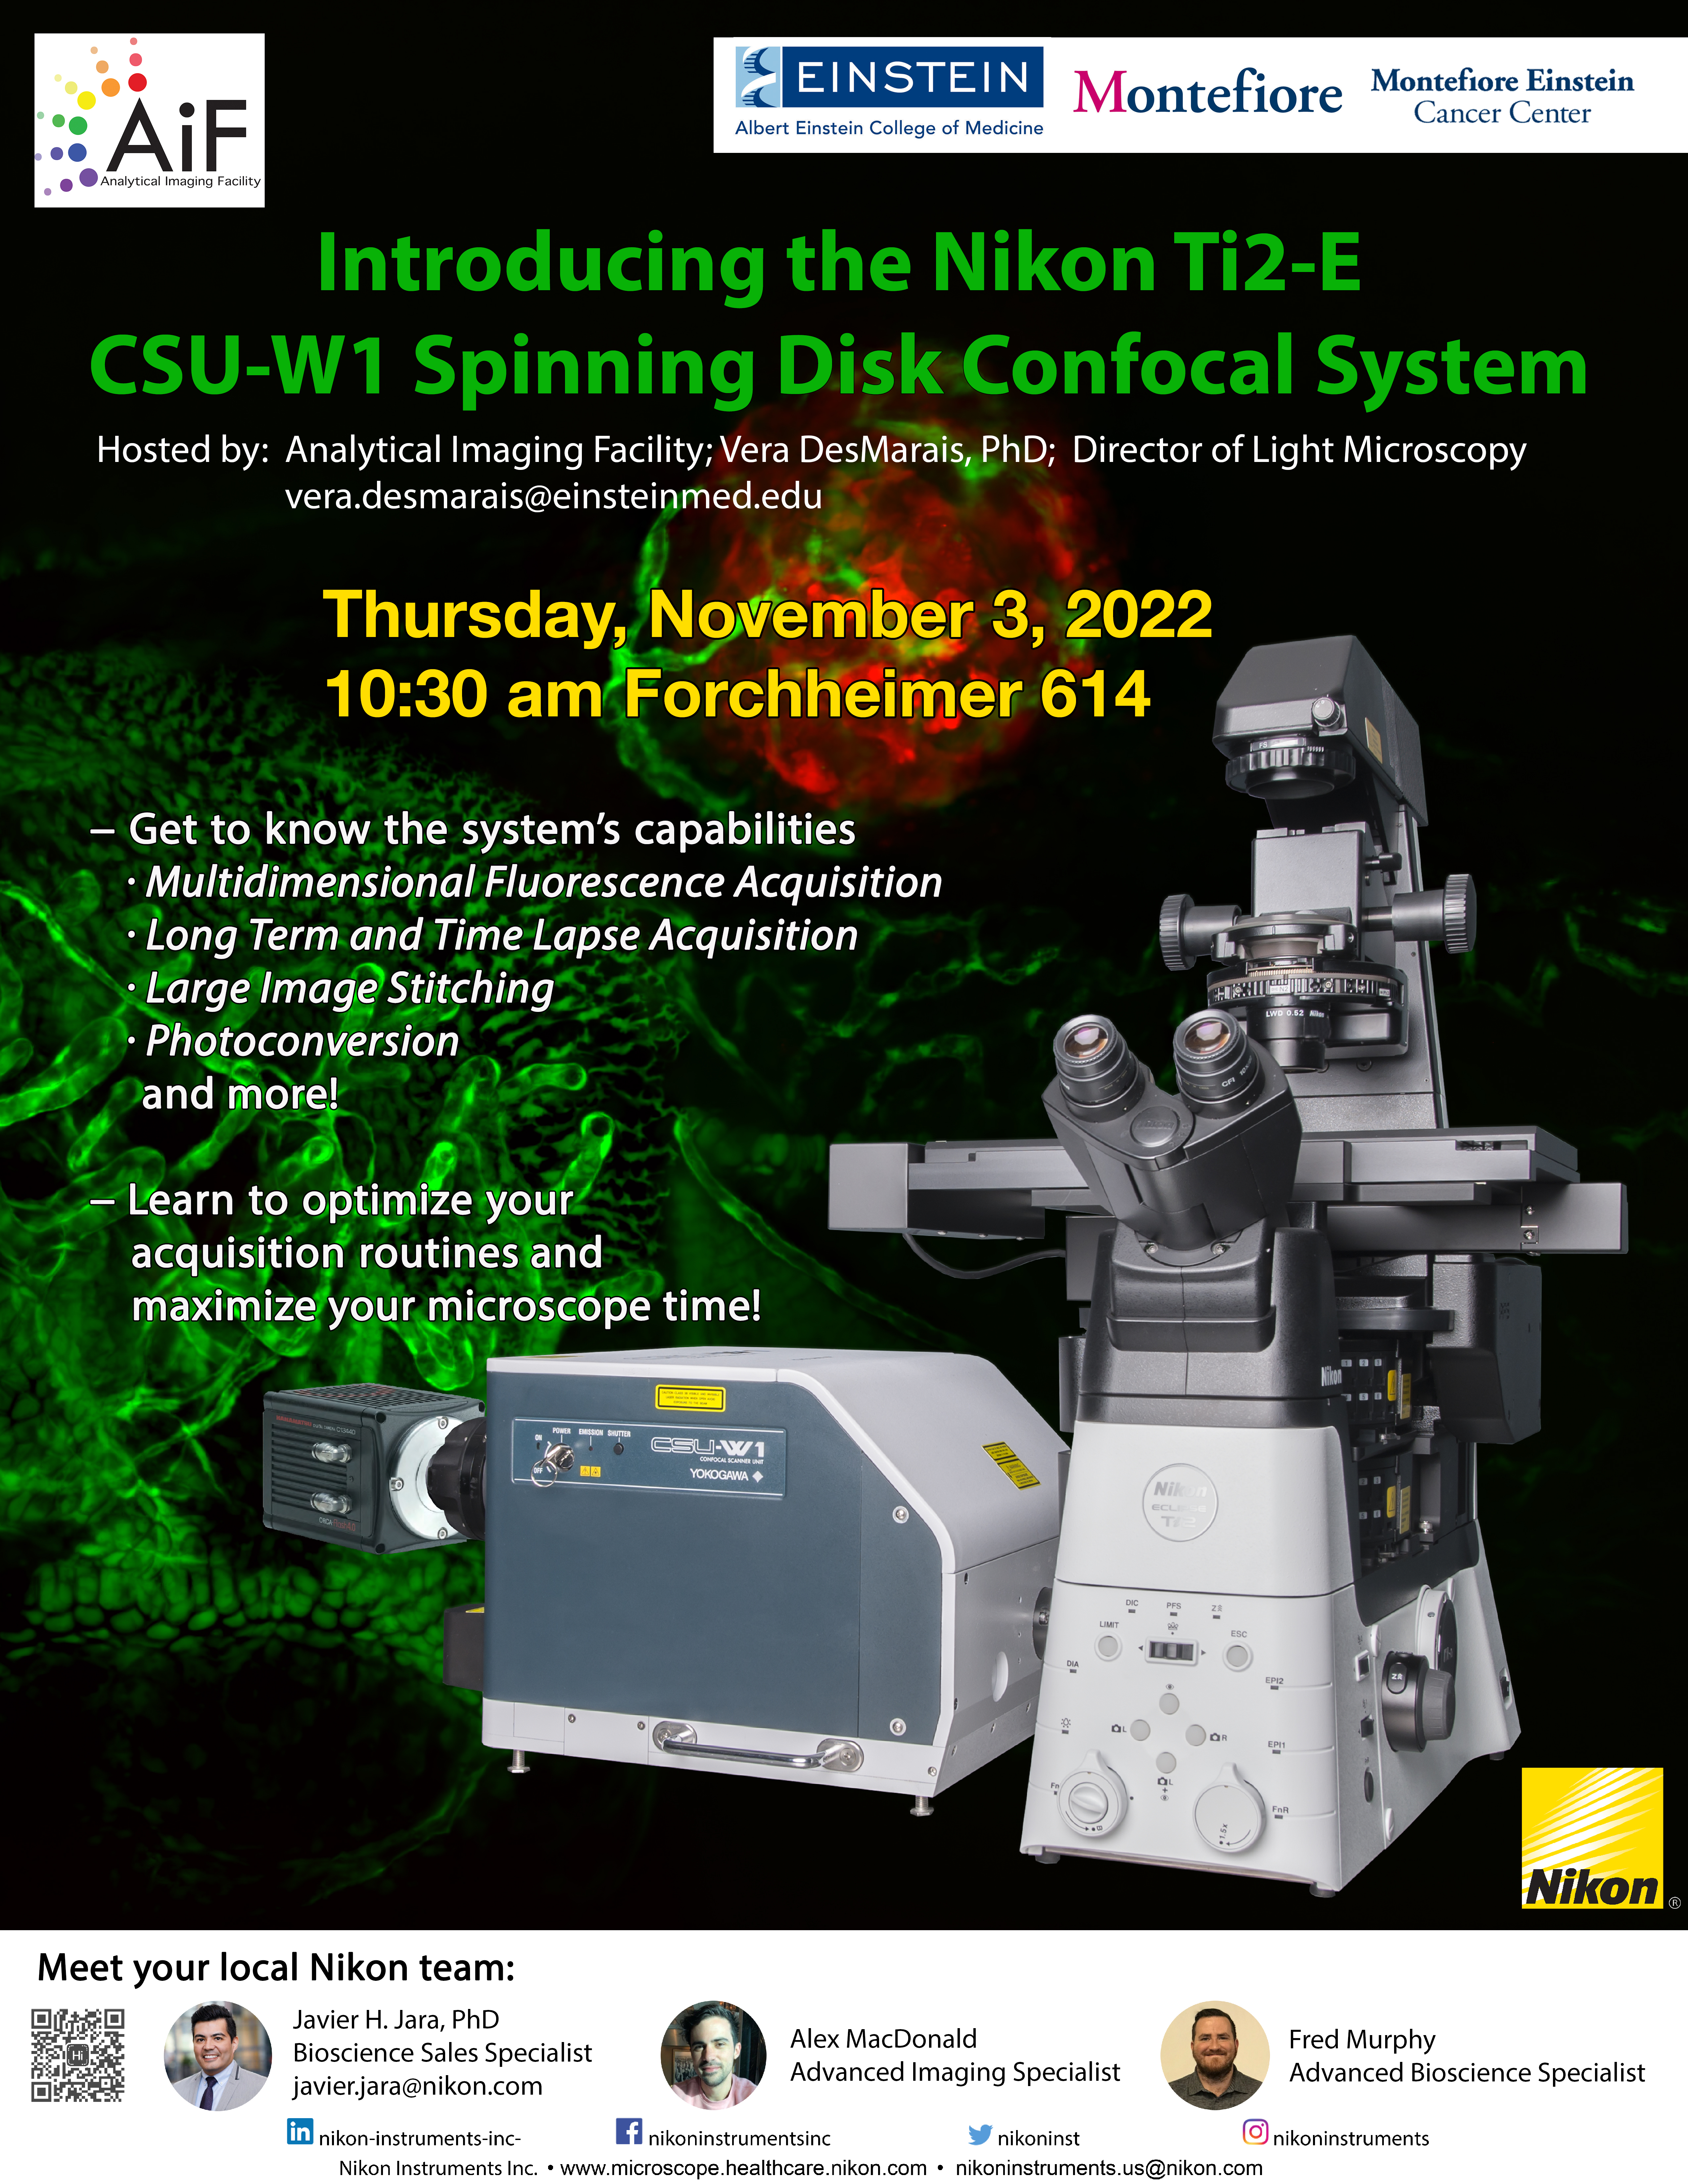 Introducing the Nikon Ti2-E CSU-W1 Spinning Disk Confocal System